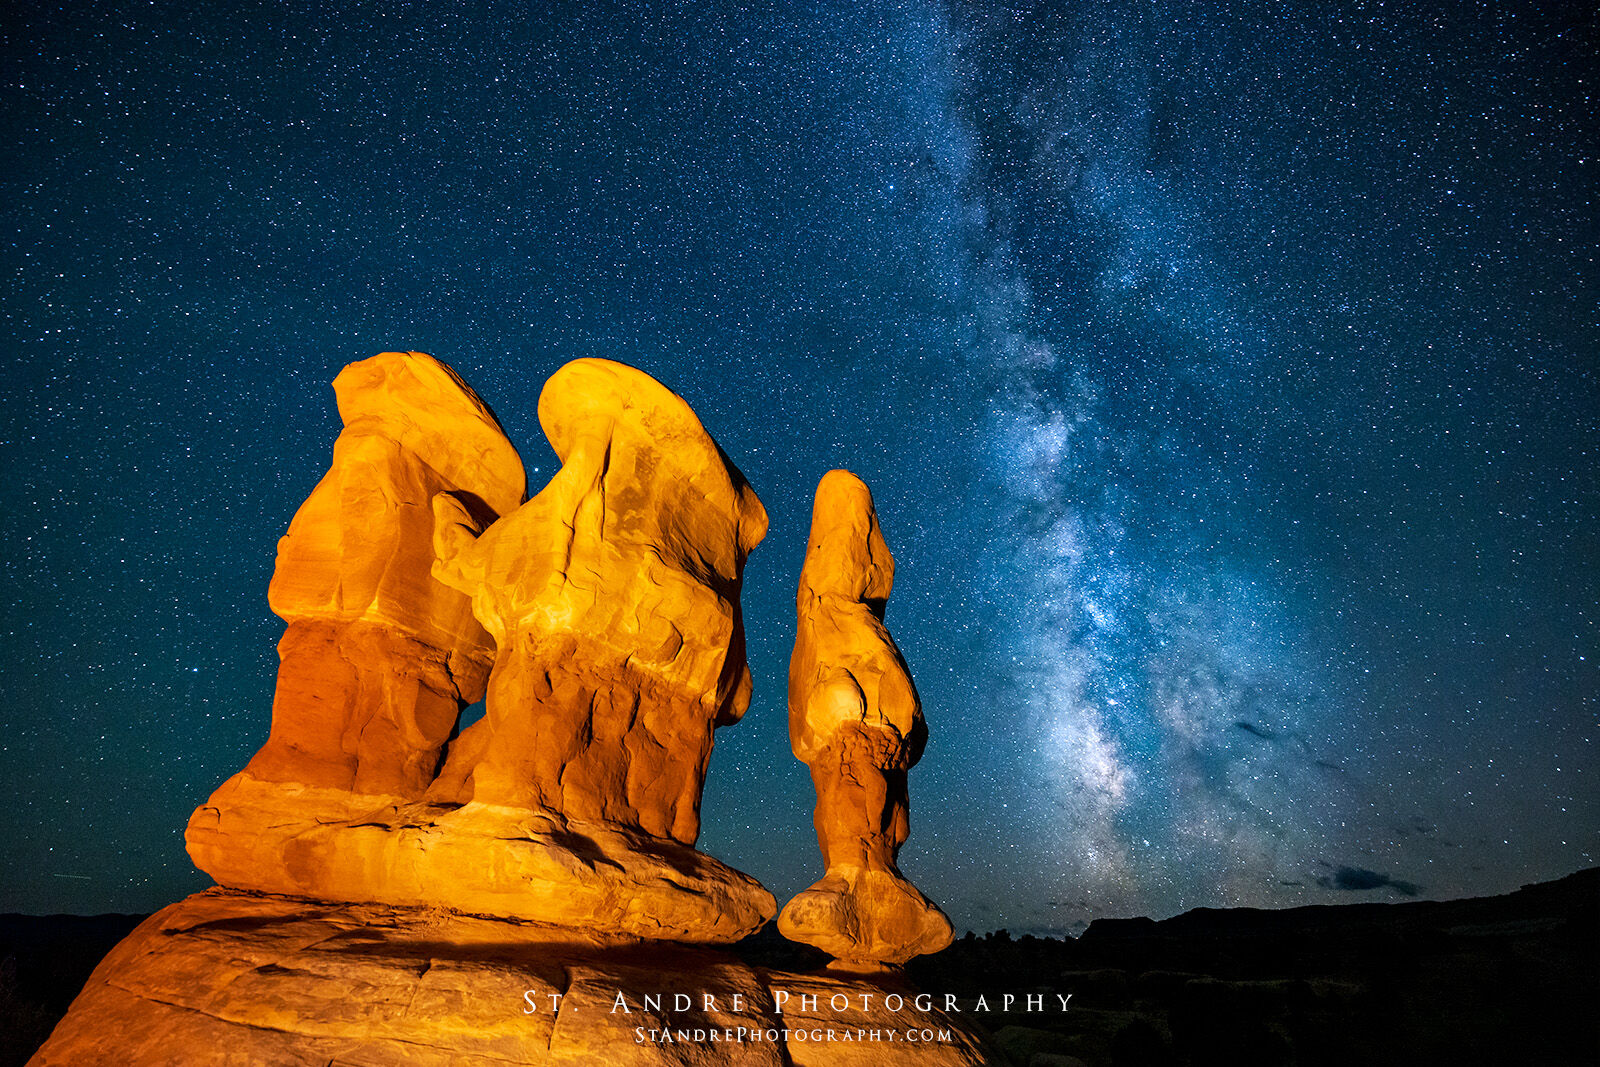 Three large hoodoos lit up by soft warm light with the Milkyway galaxy stretching across the night sky.